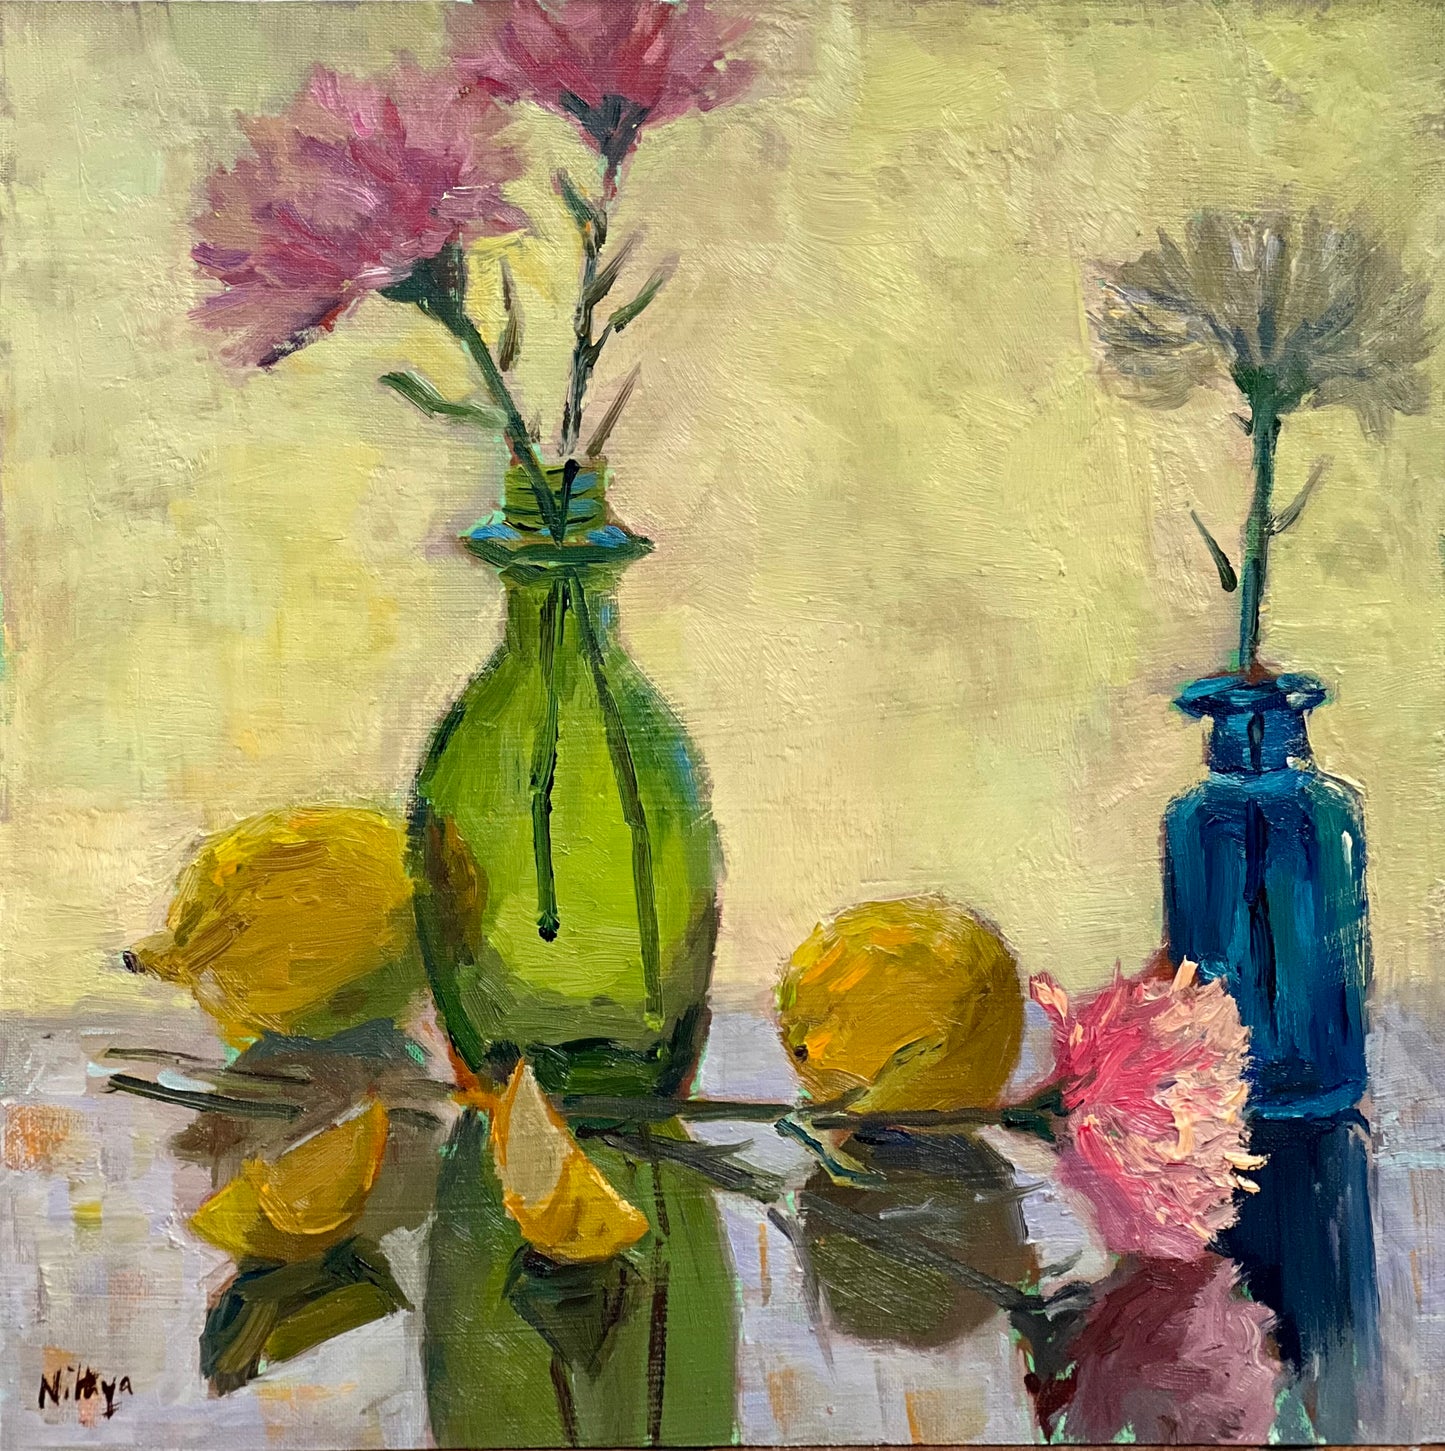 Colored bottles and lemons by the window - still life oil painting